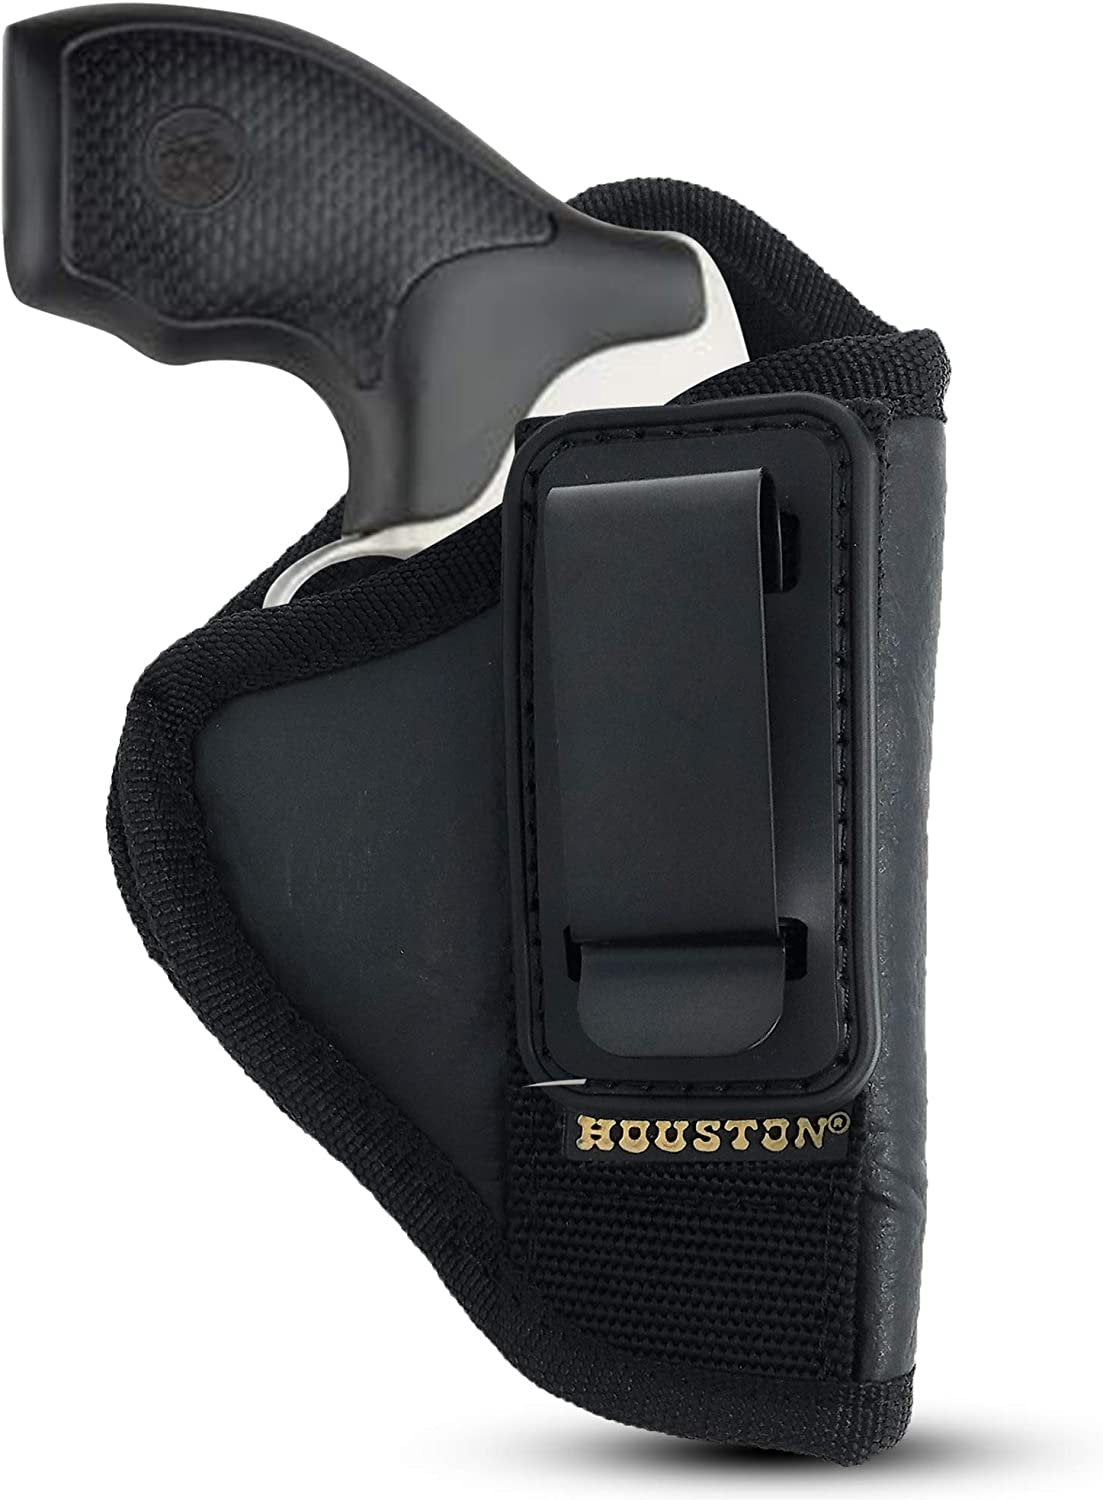 IWB TUCKABLE Revolver Holster by Houston - ECO Leather Concealed Carry Soft Material | Suede Interior for Protection | Fits Any 38 J Frames, S&W, Charter Arms, Rossi 38, Taurus,BG,LCR (Right) Black